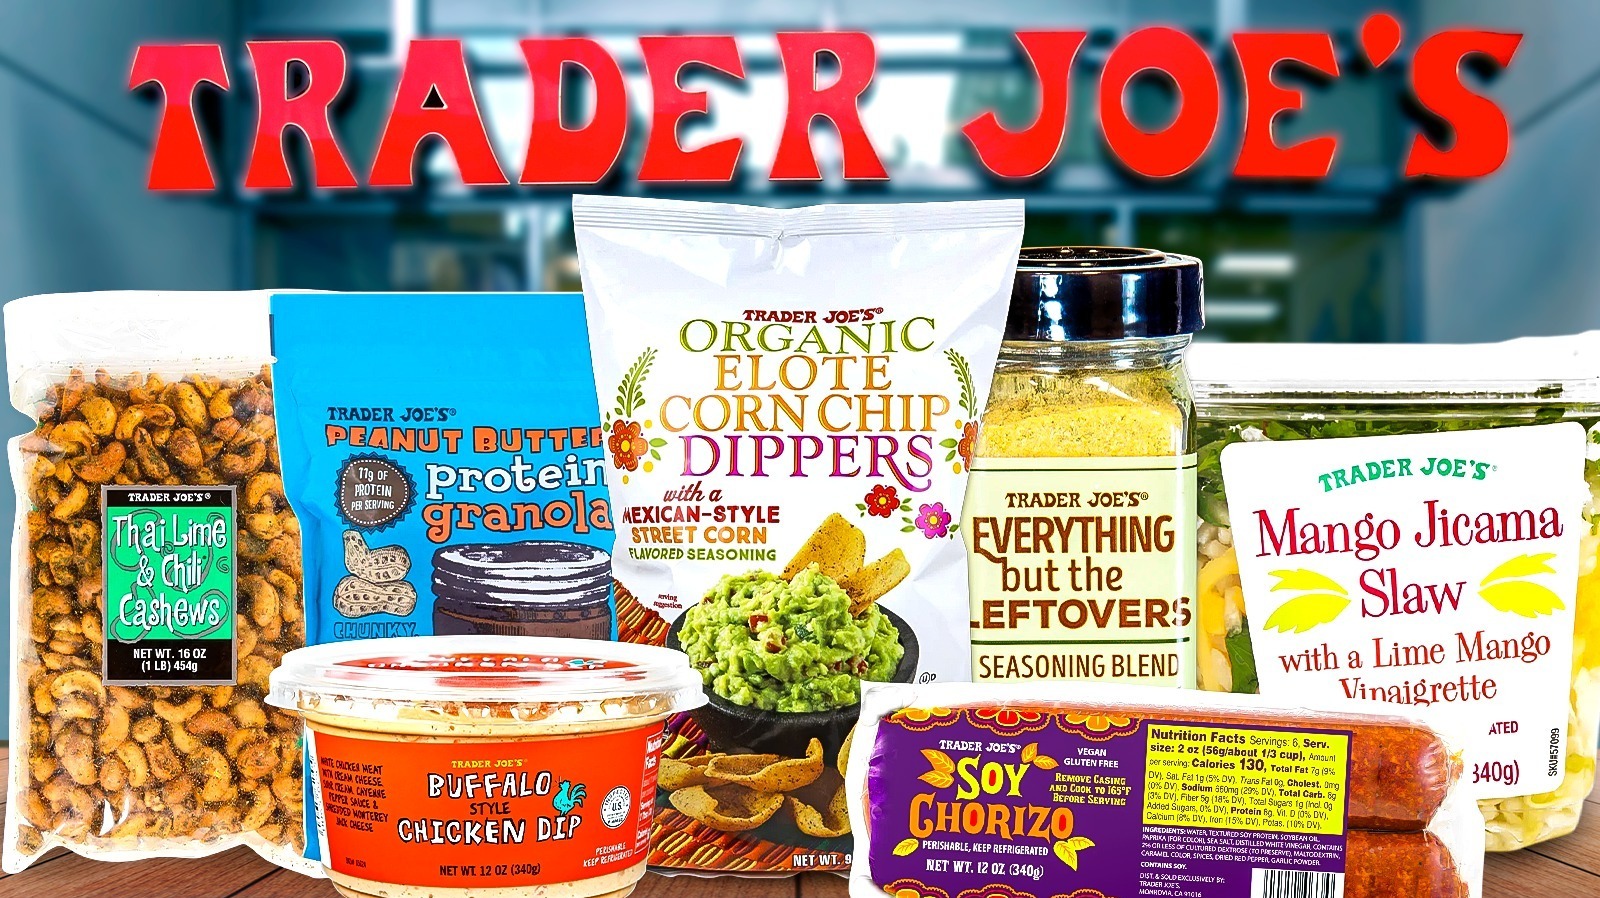 https://www.tastingtable.com/img/gallery/30-underrated-trader-joes-items-you-need-to-try/l-intro-1687368652.jpg